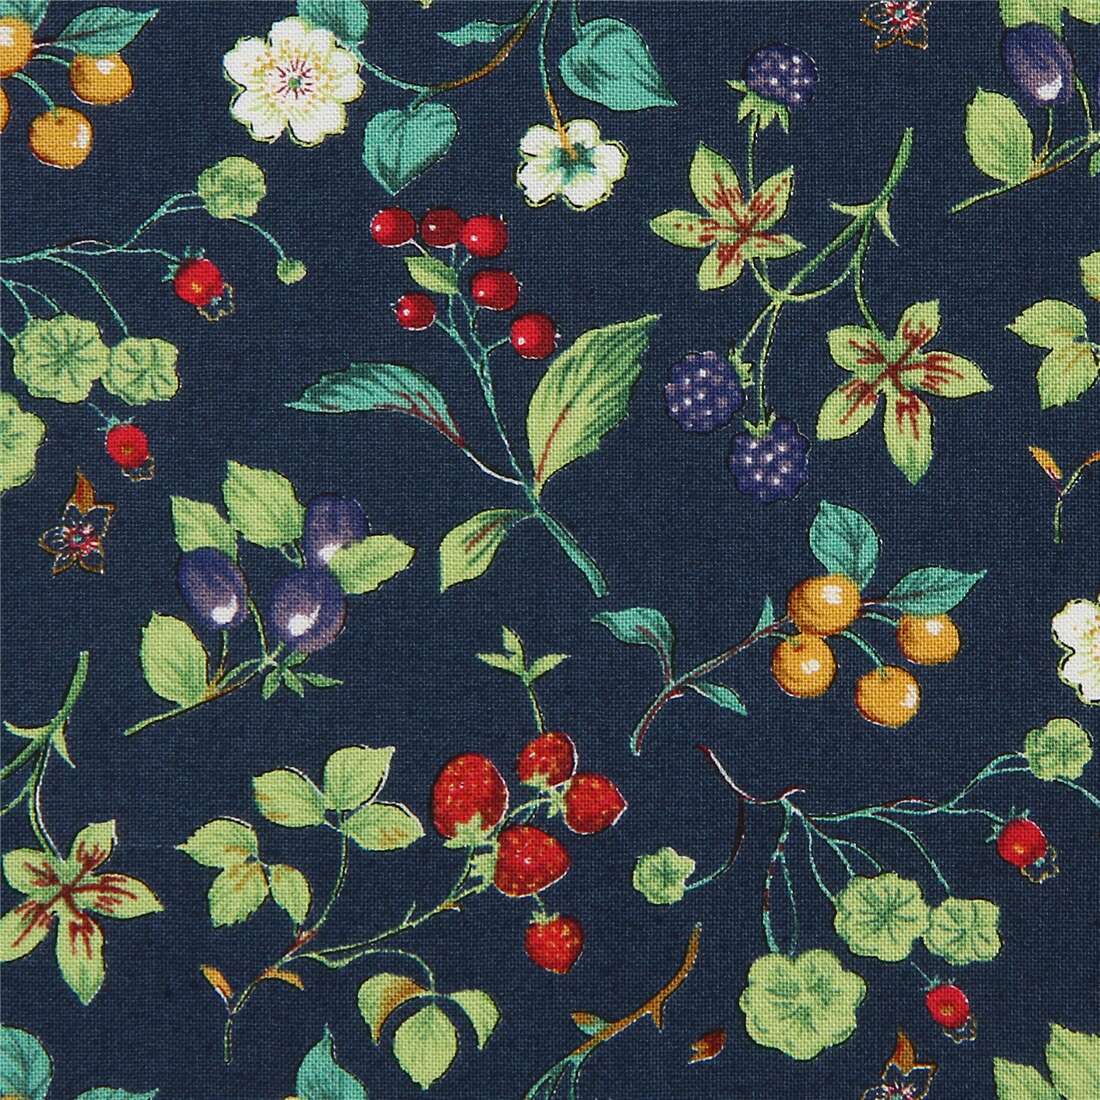 Dark Delicate Berries Strawberry Mulberry Fabric by Japanese Indie ...